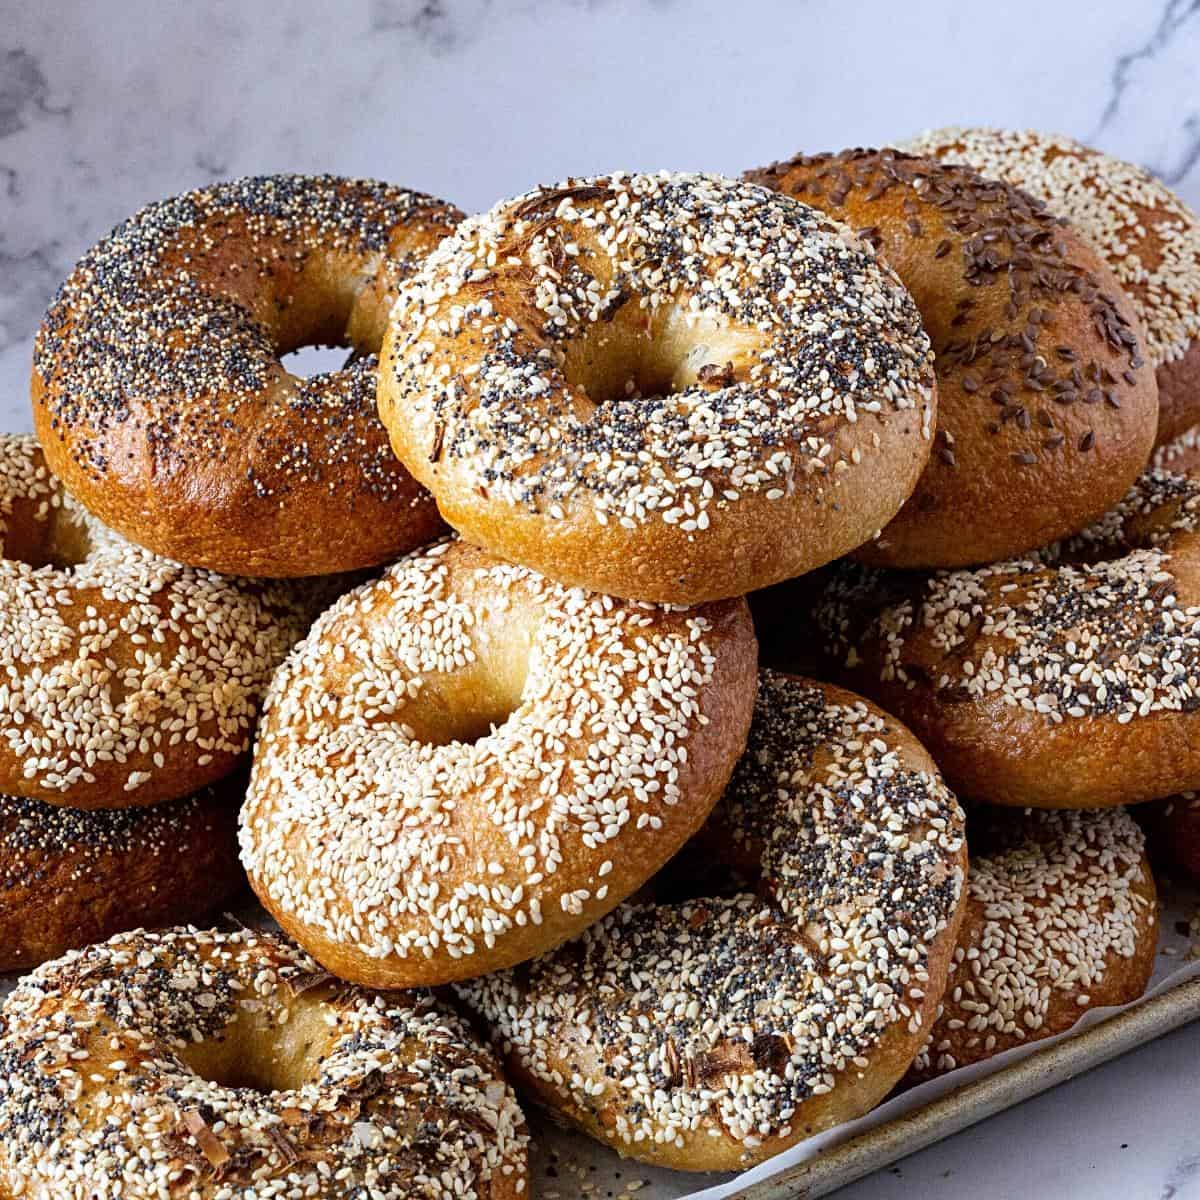 A baking tray with a stack of various bagels.